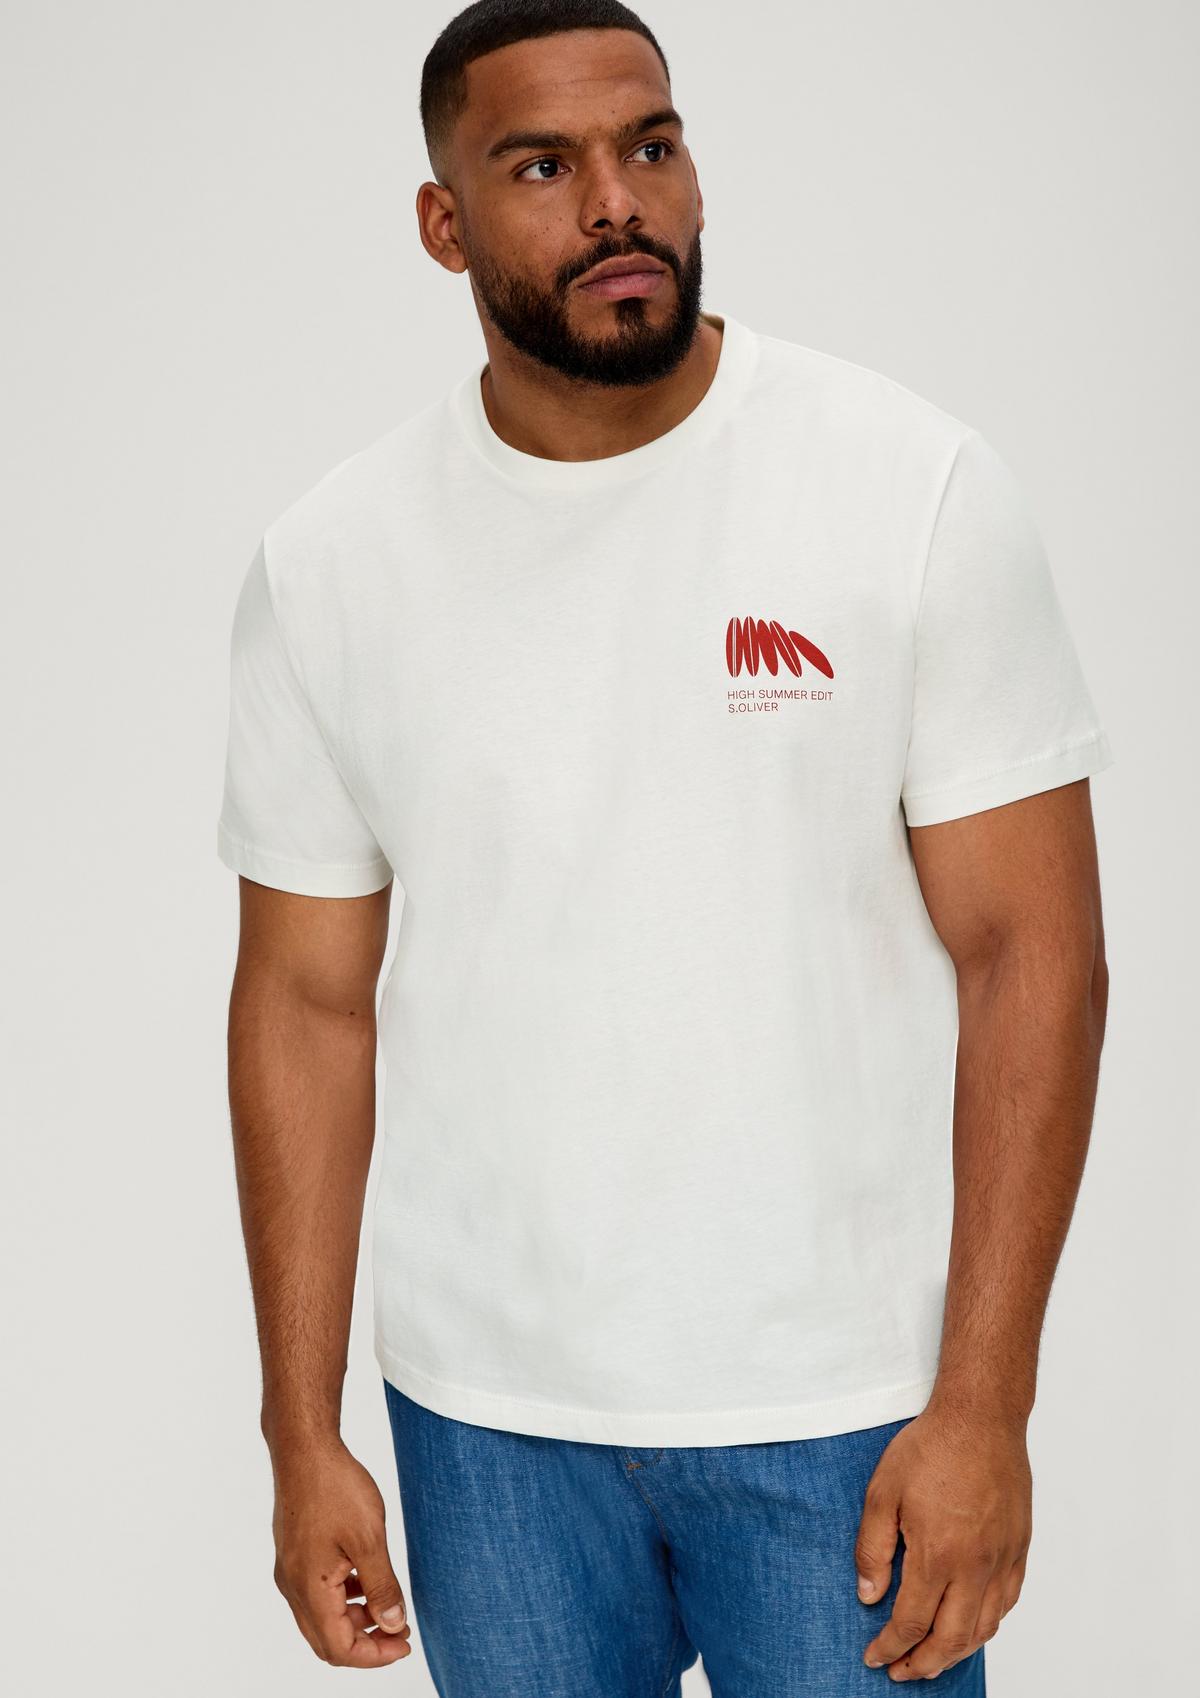 Cotton T-shirt with white front a - print